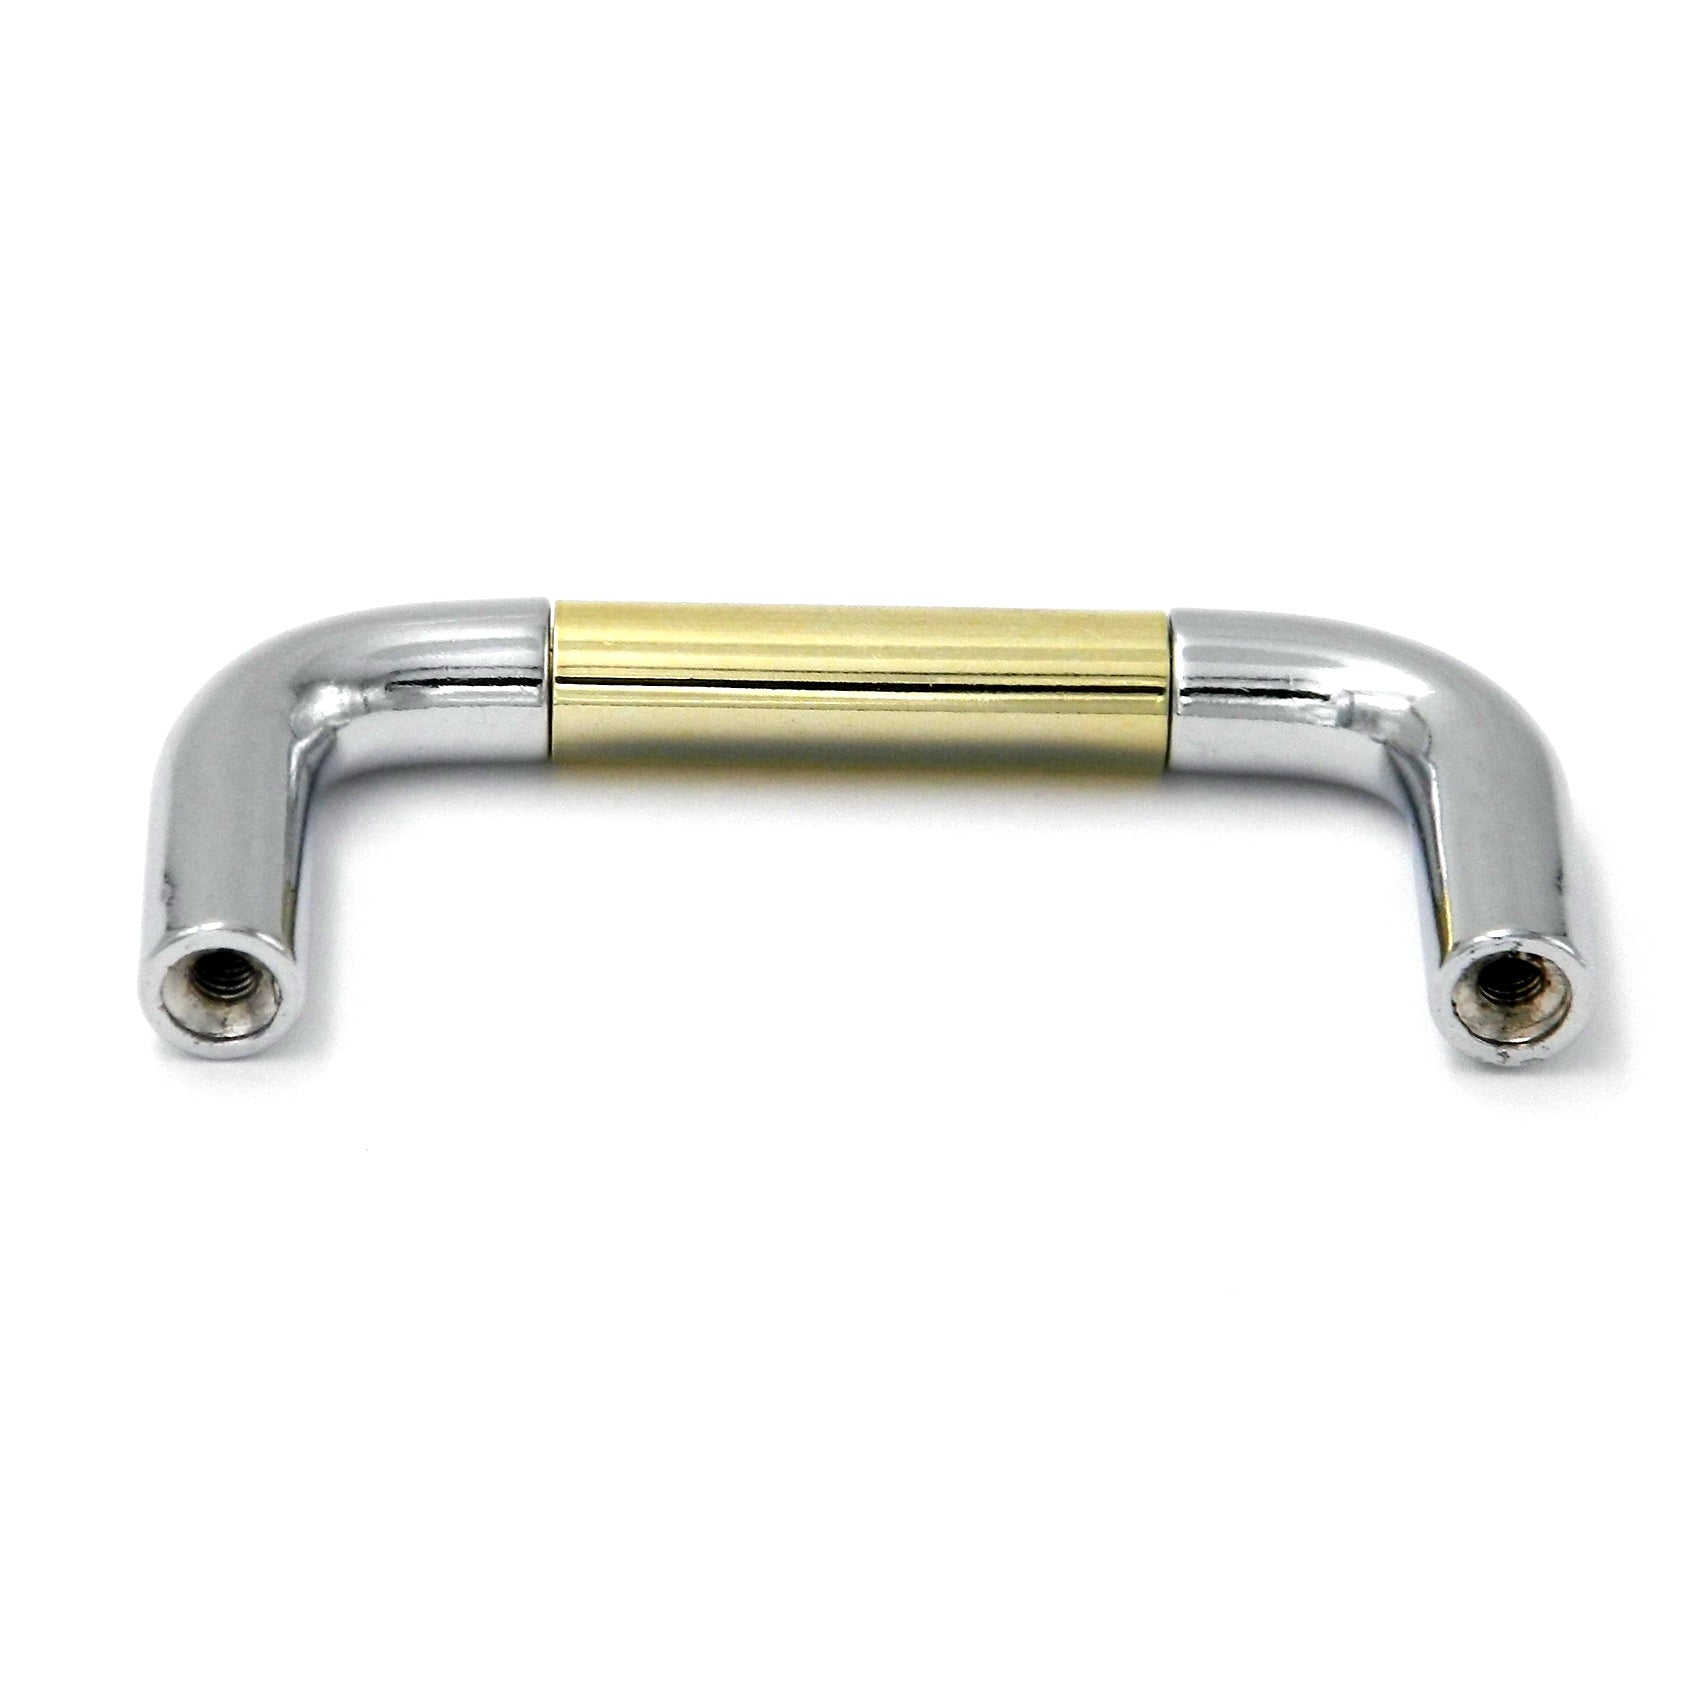 P734-PBCH Chrome Cabinet Handle Pull with Brass, White or Clear Center, 3"cc or 3 3/4" Belwith Hickory